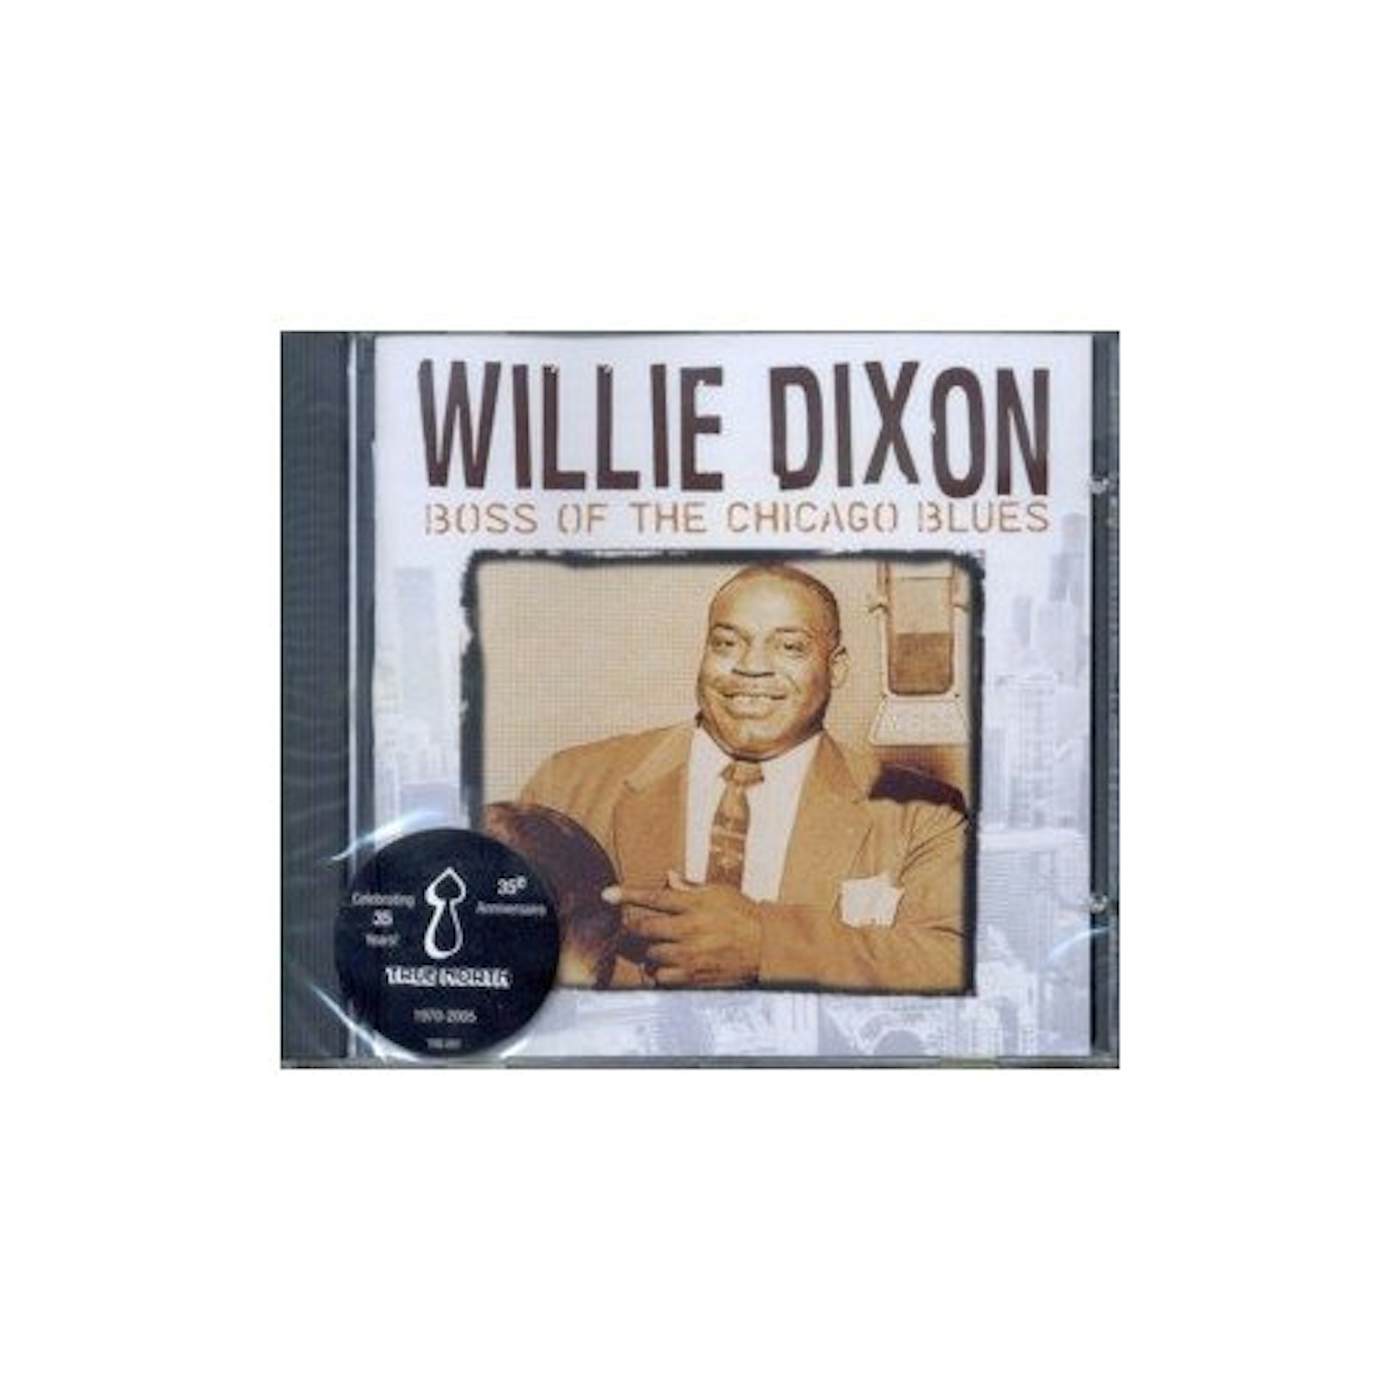 Willie Dixon BOSS OF THE CHICAGO BLUES CD